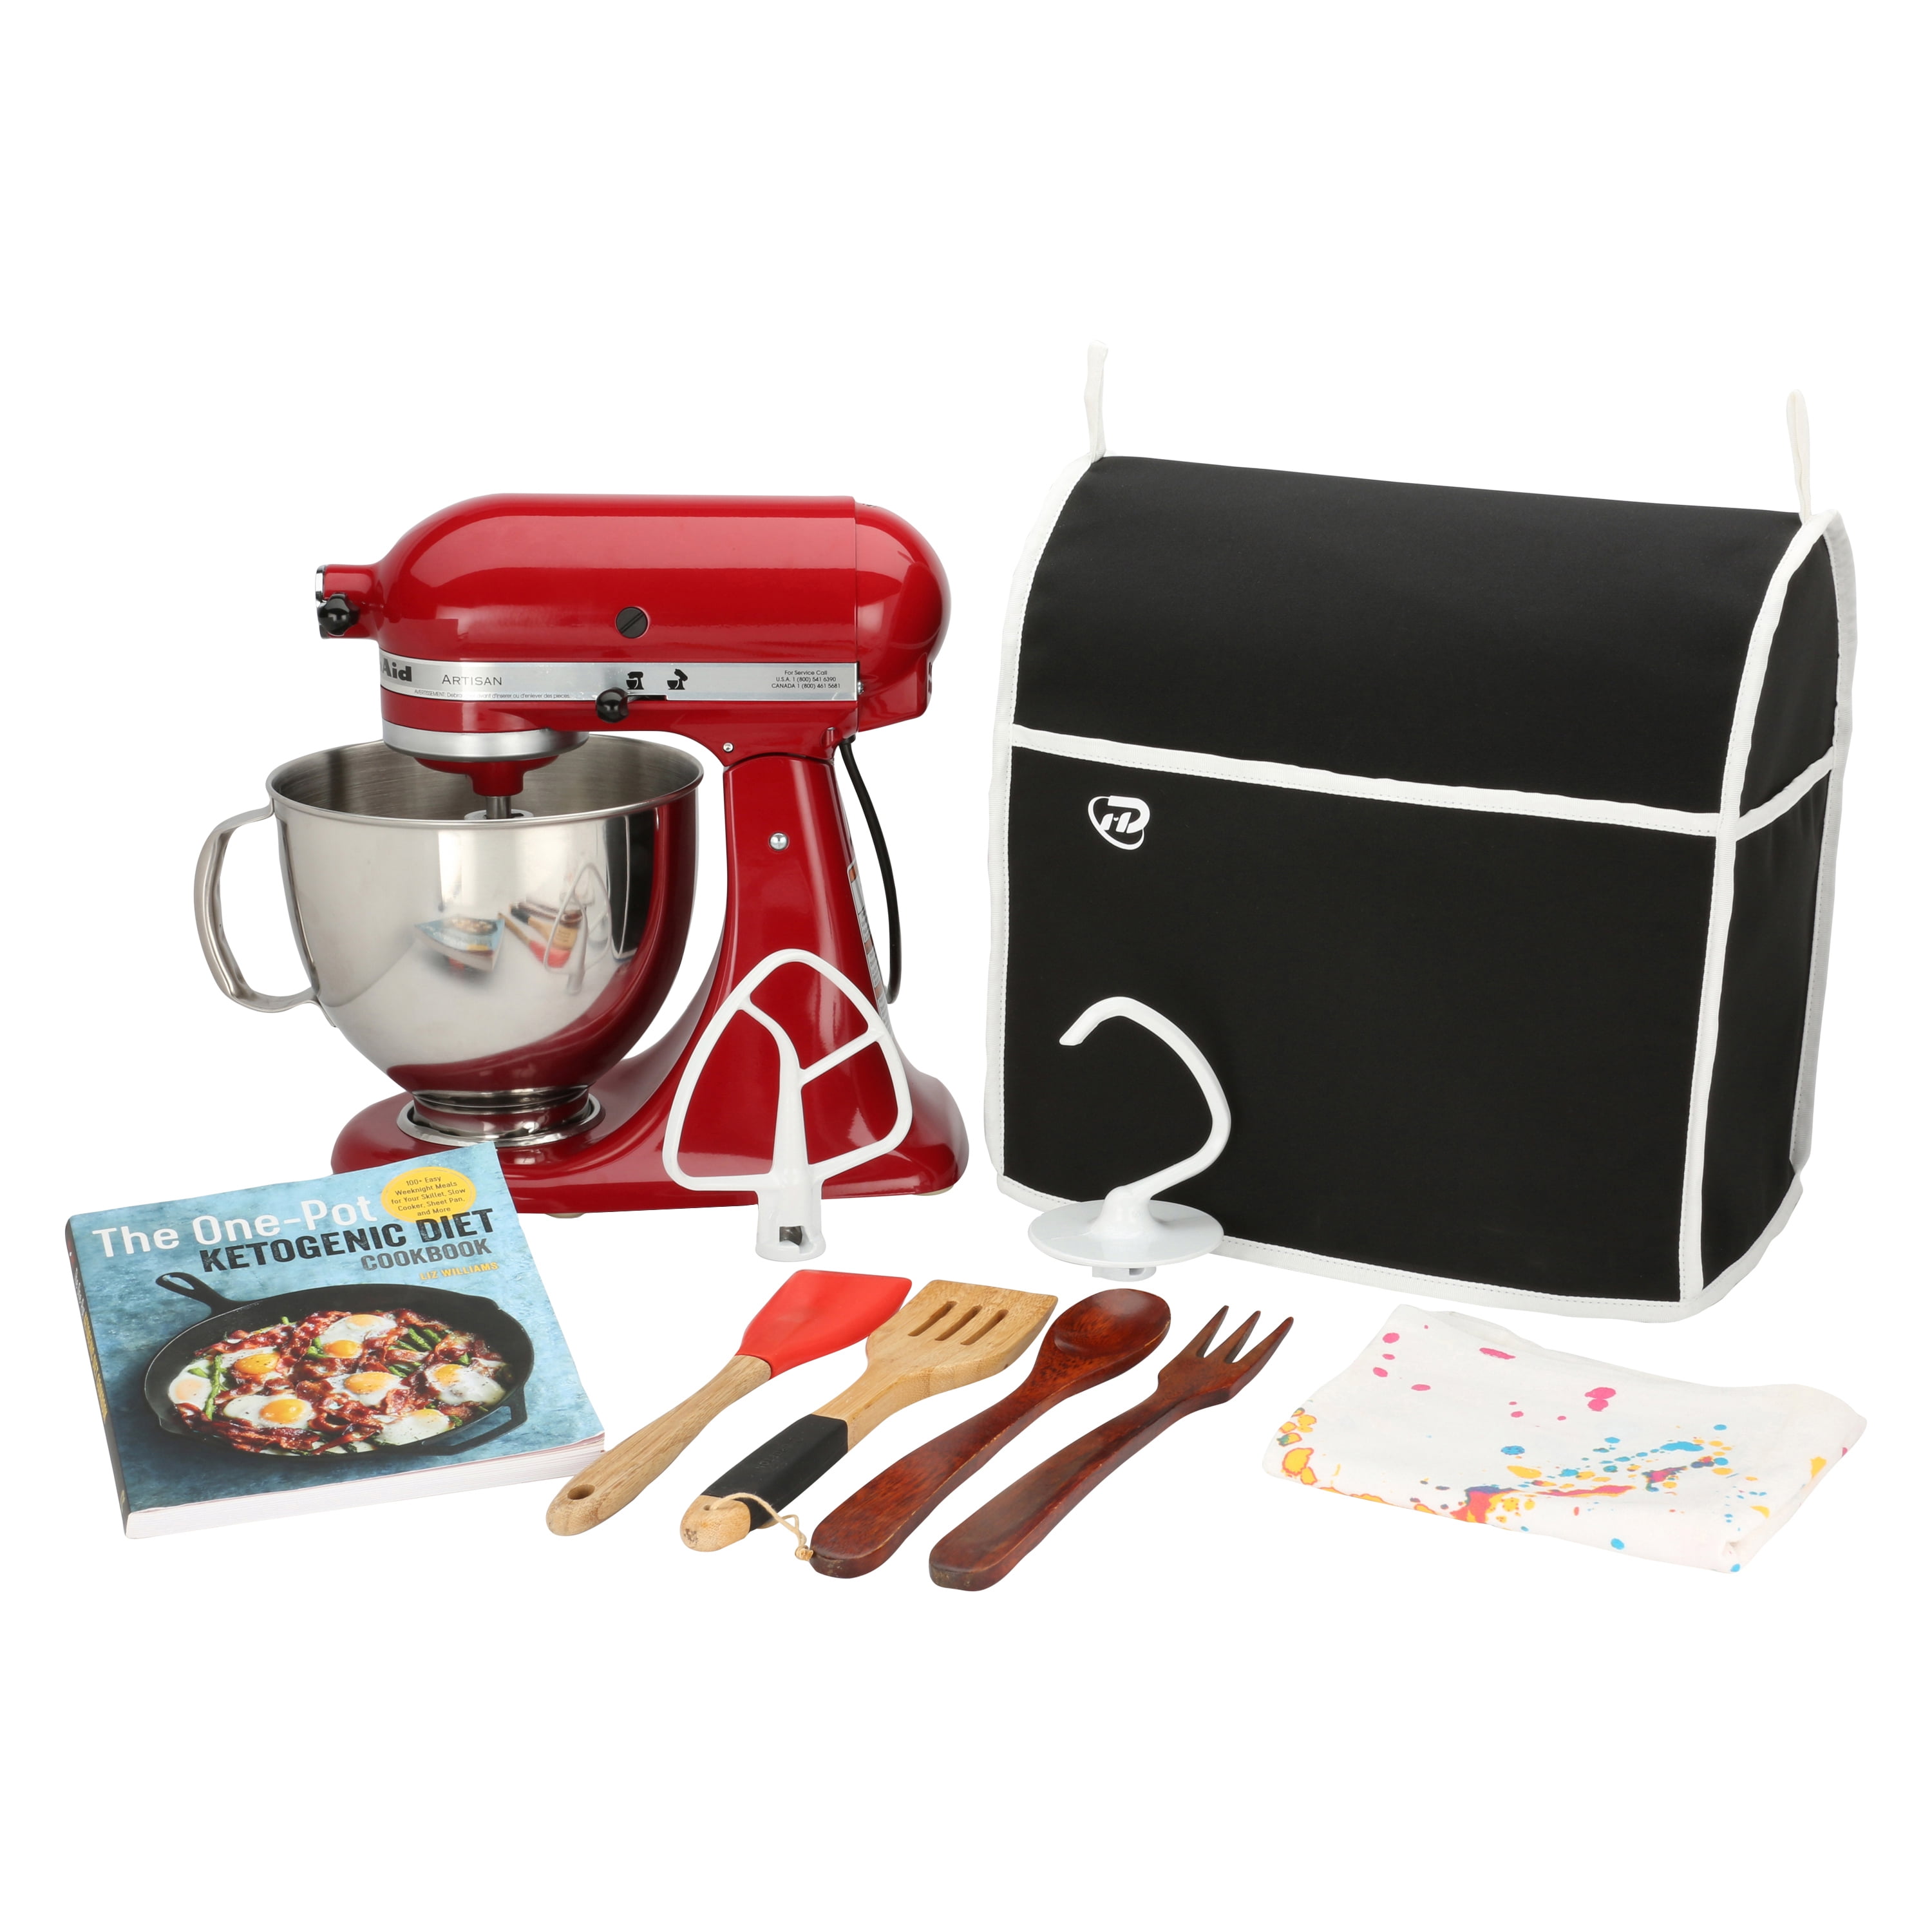 Stand Mixer Dust-proof Cover with Organizer Bag for Kitchenaid